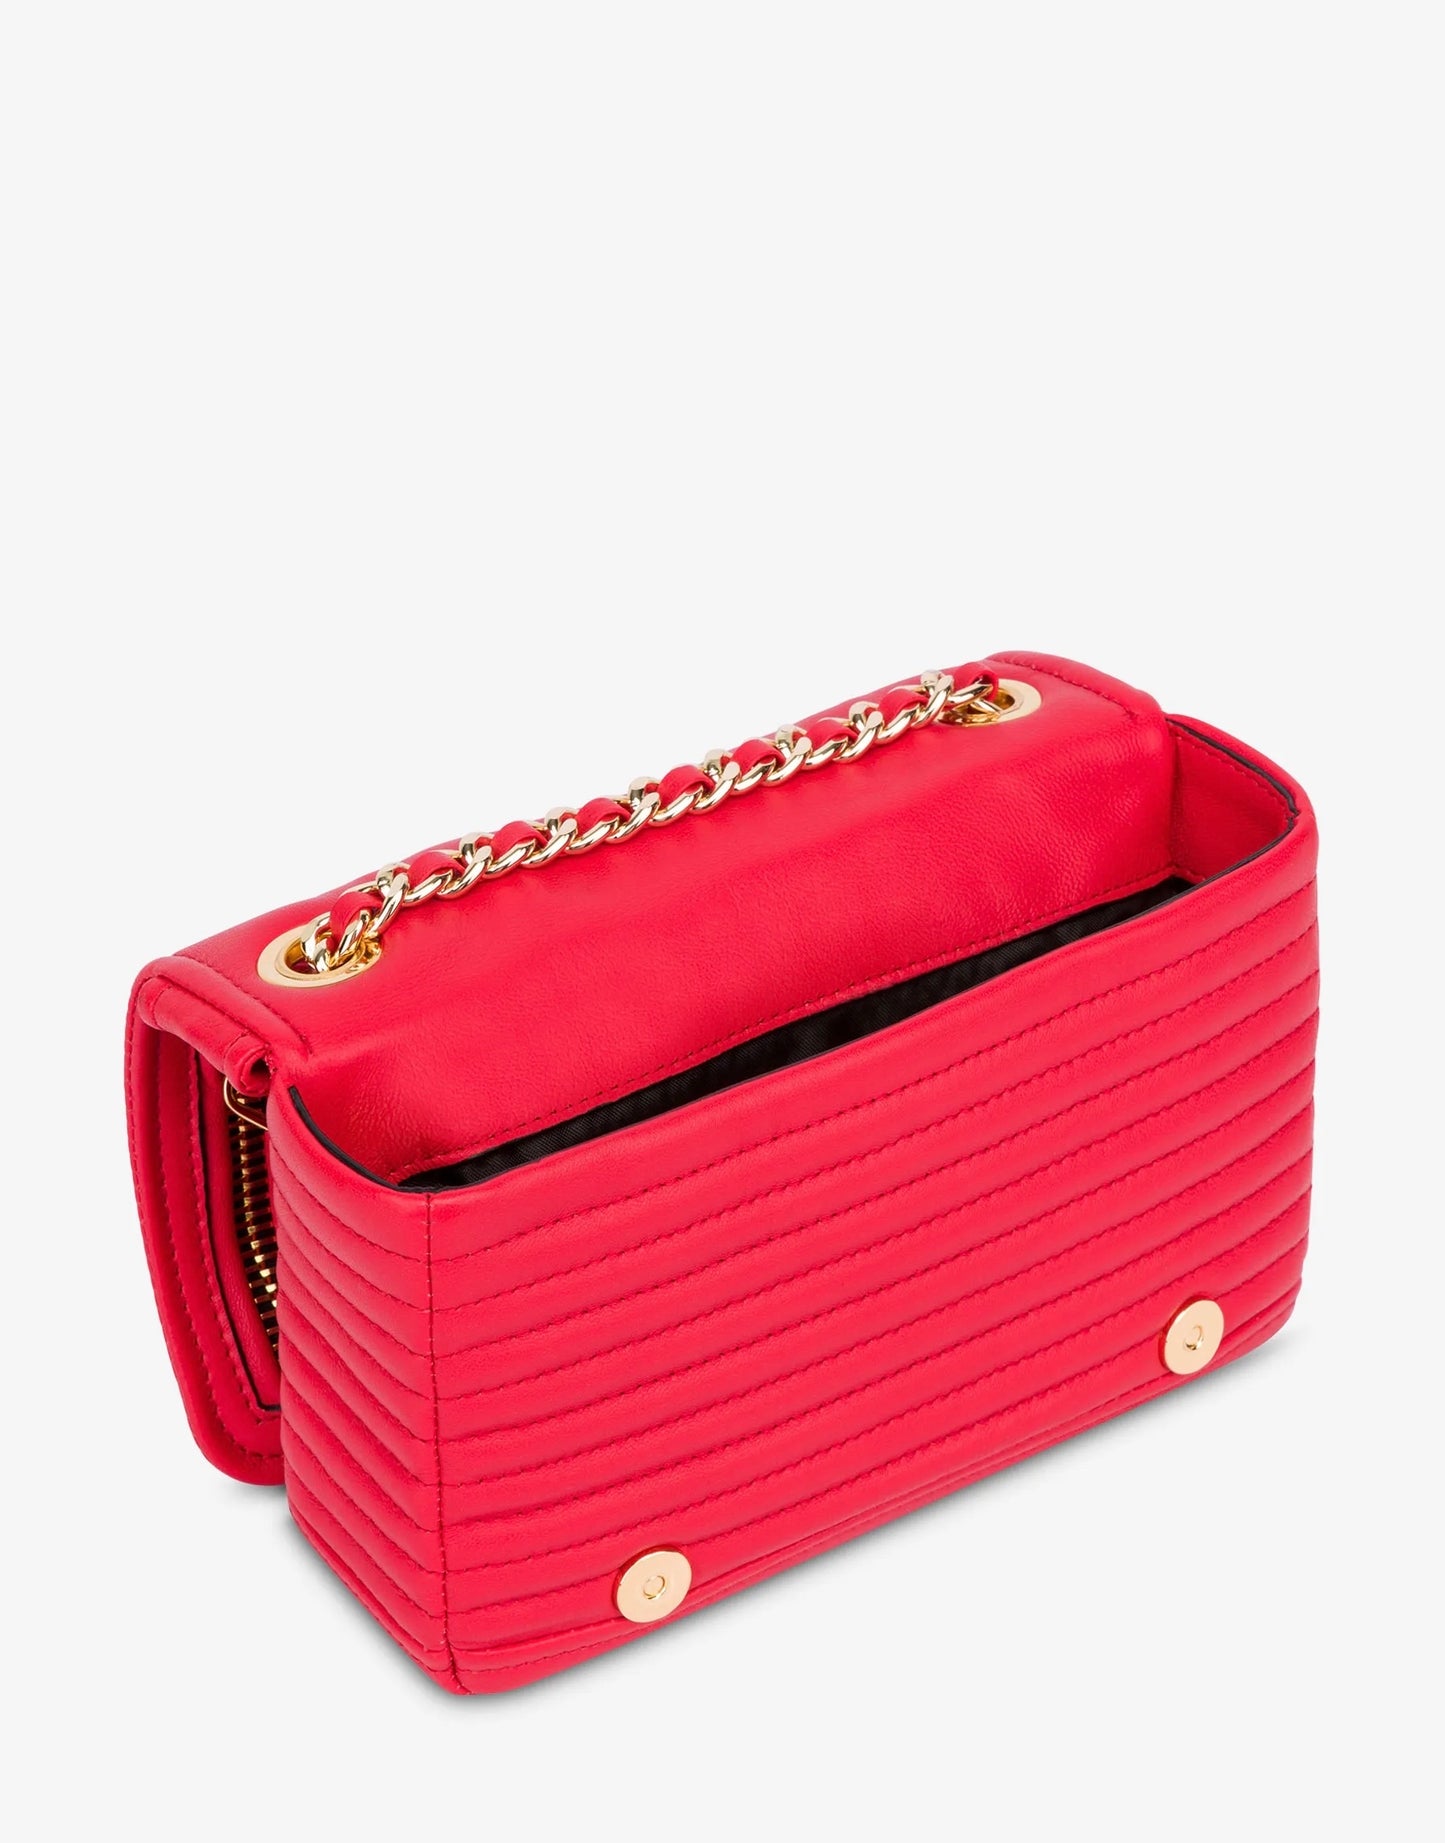 Moschino Zippered Leather Jacket Biker Shoulder Bag, Red, Retail $1795